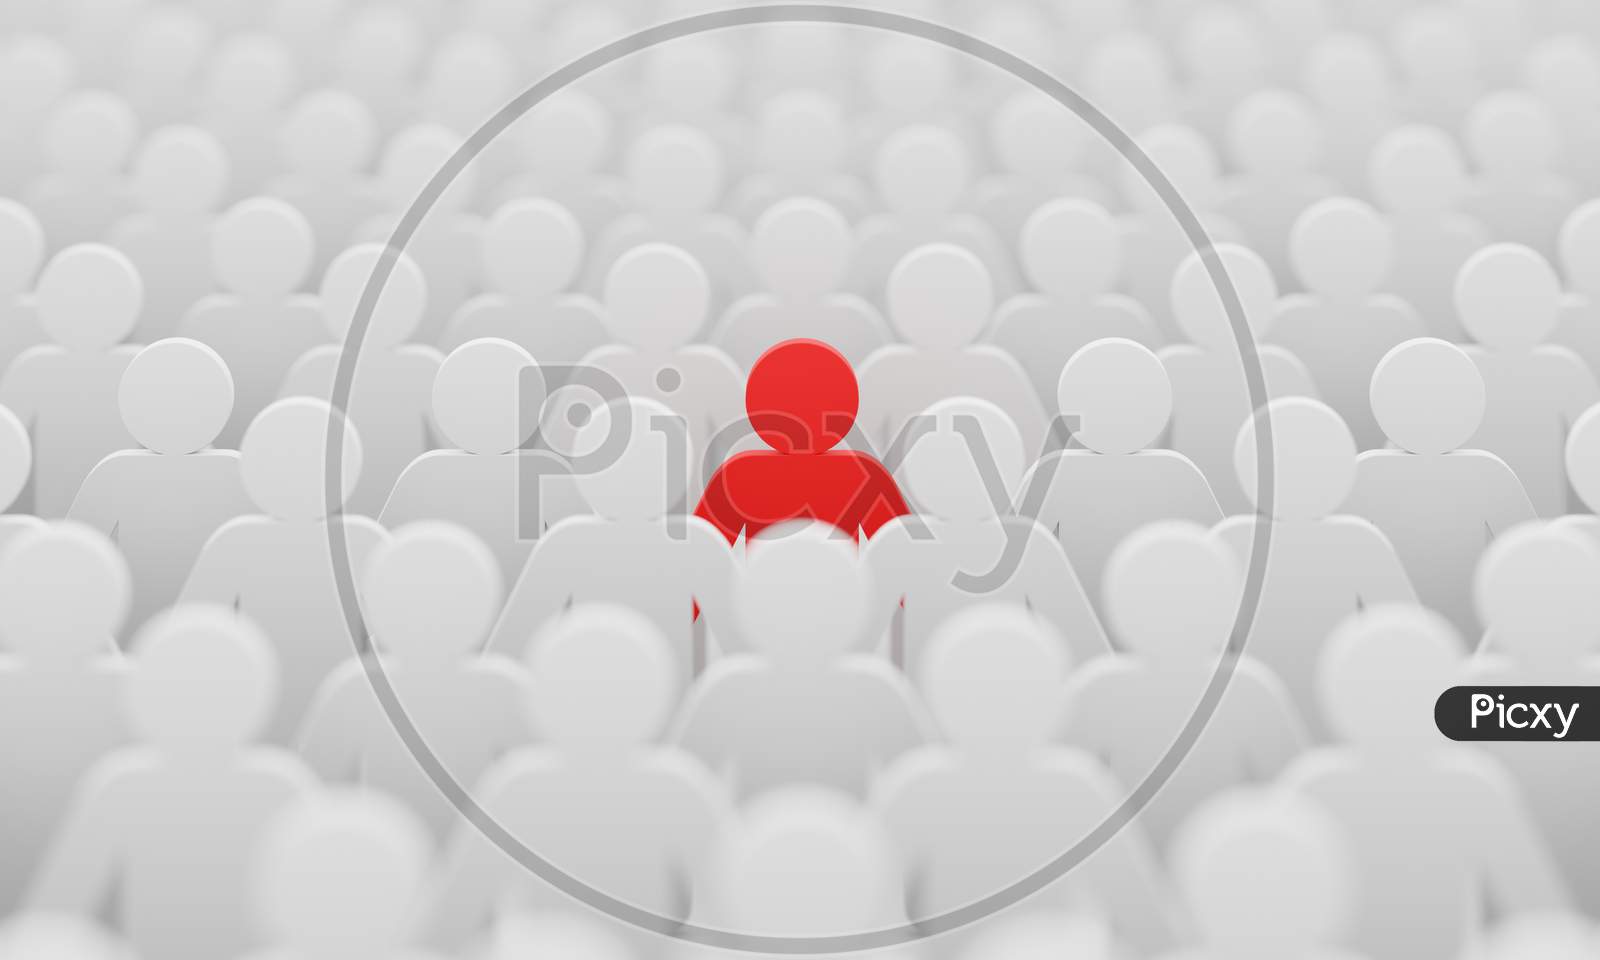 Red Man Color Figurine Among Crowd White Men People Background. Social Lifestyle And Business Competition And Strange Person Concept. Human Character Symbol Theme. 3D Illustration Rendering.